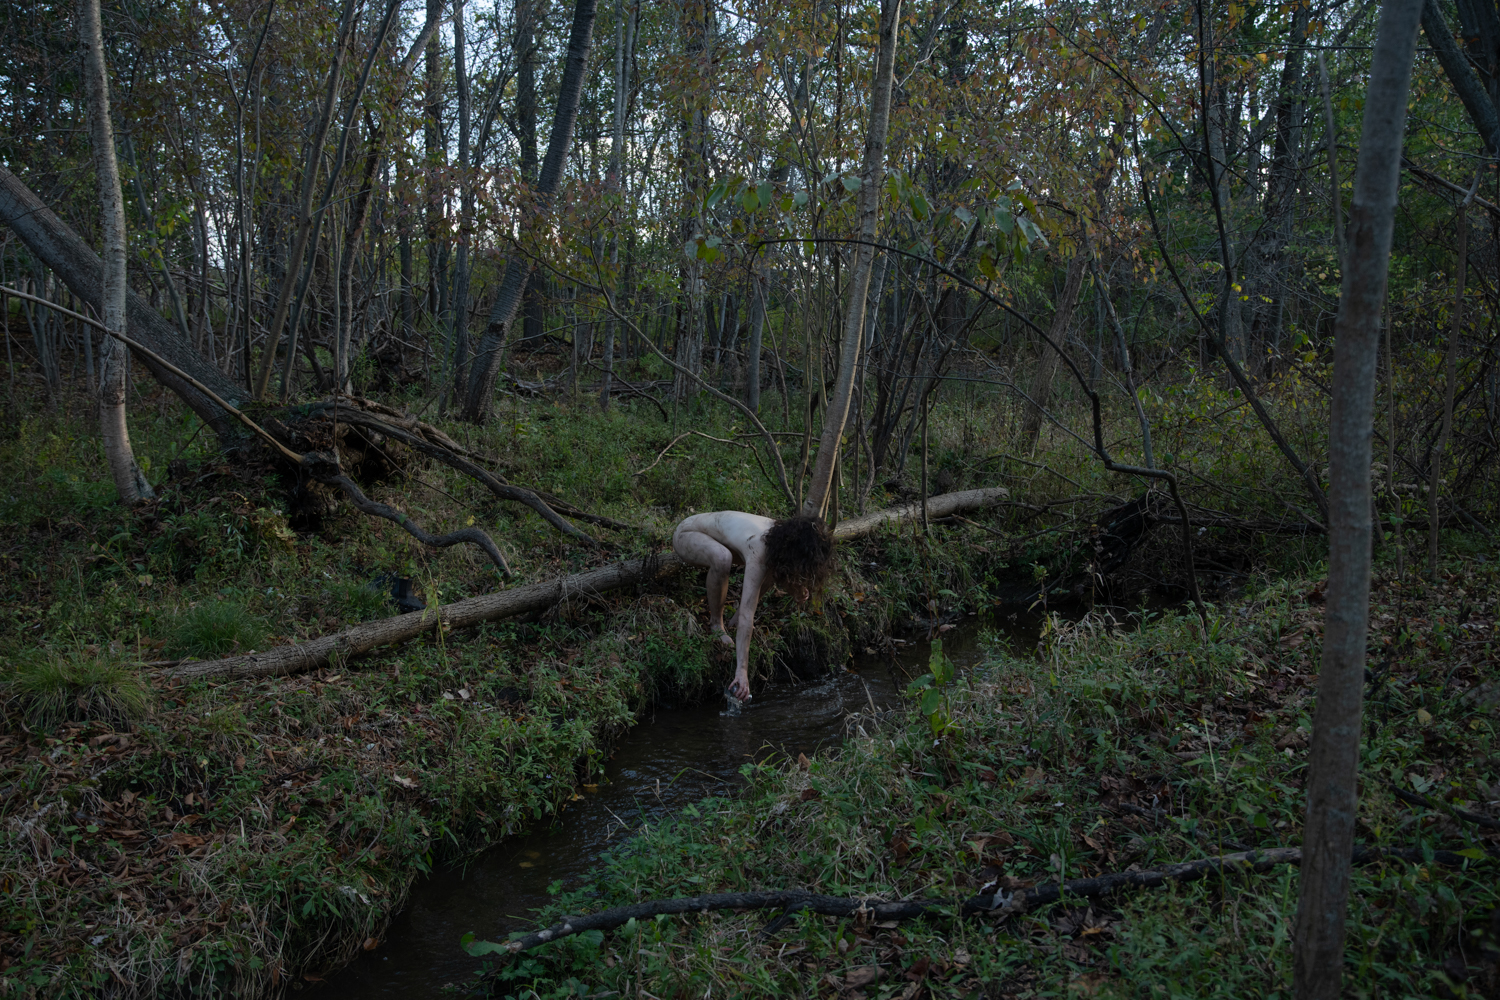 A woman straddles a fallen tree limb in a forest.